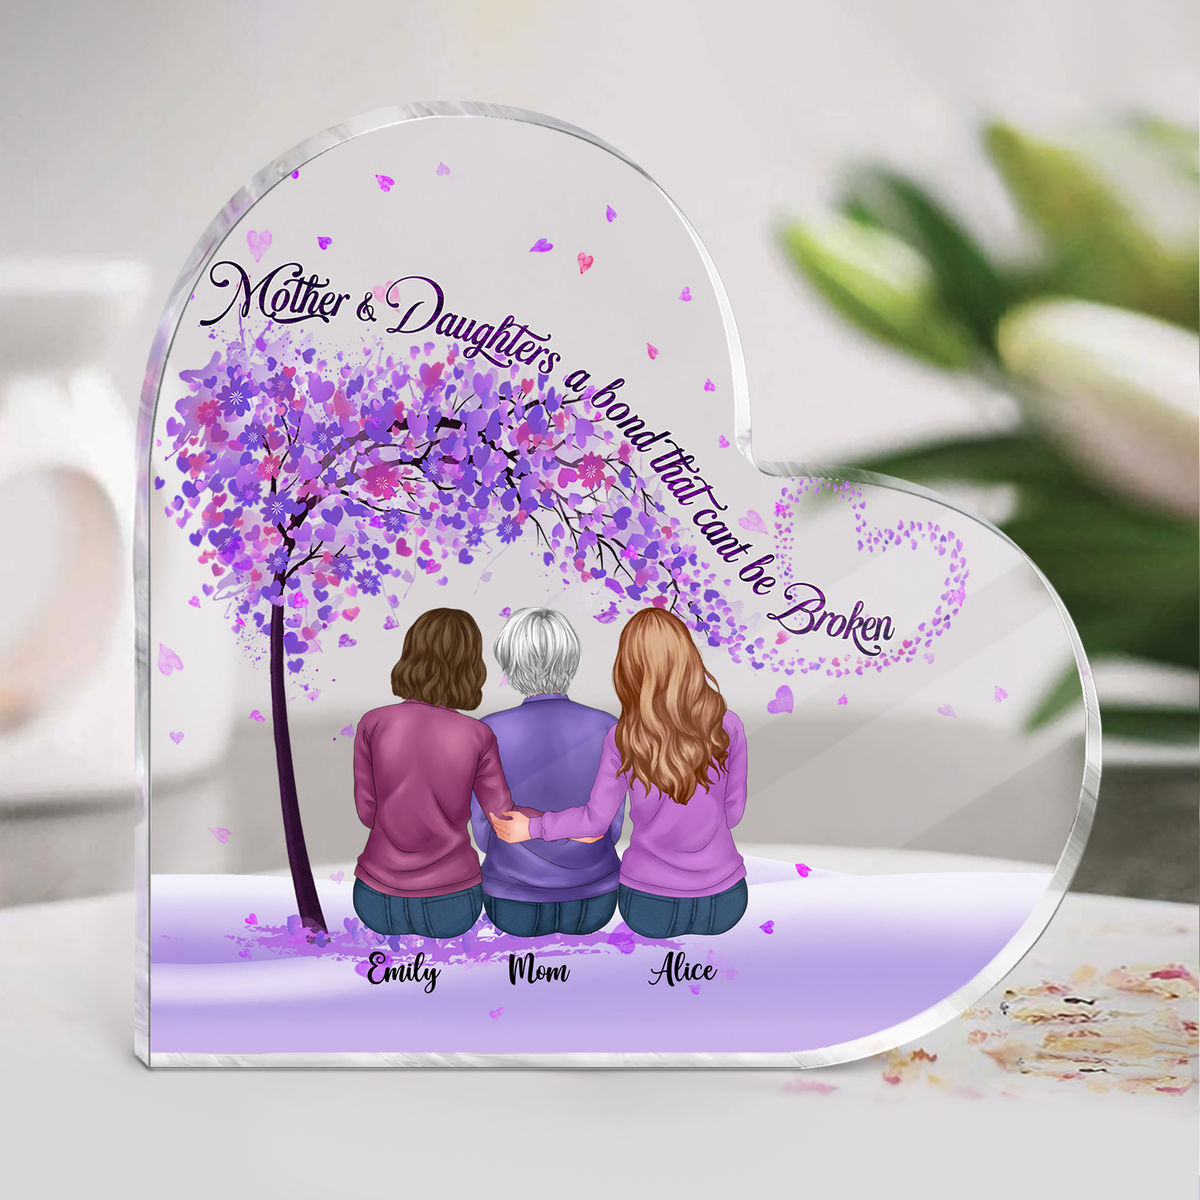 Gifts For Mom - Mother and Daughters a bond that can't be broken - Xmas, Mother's Day, Birthday Gifts - Personalized Desktop